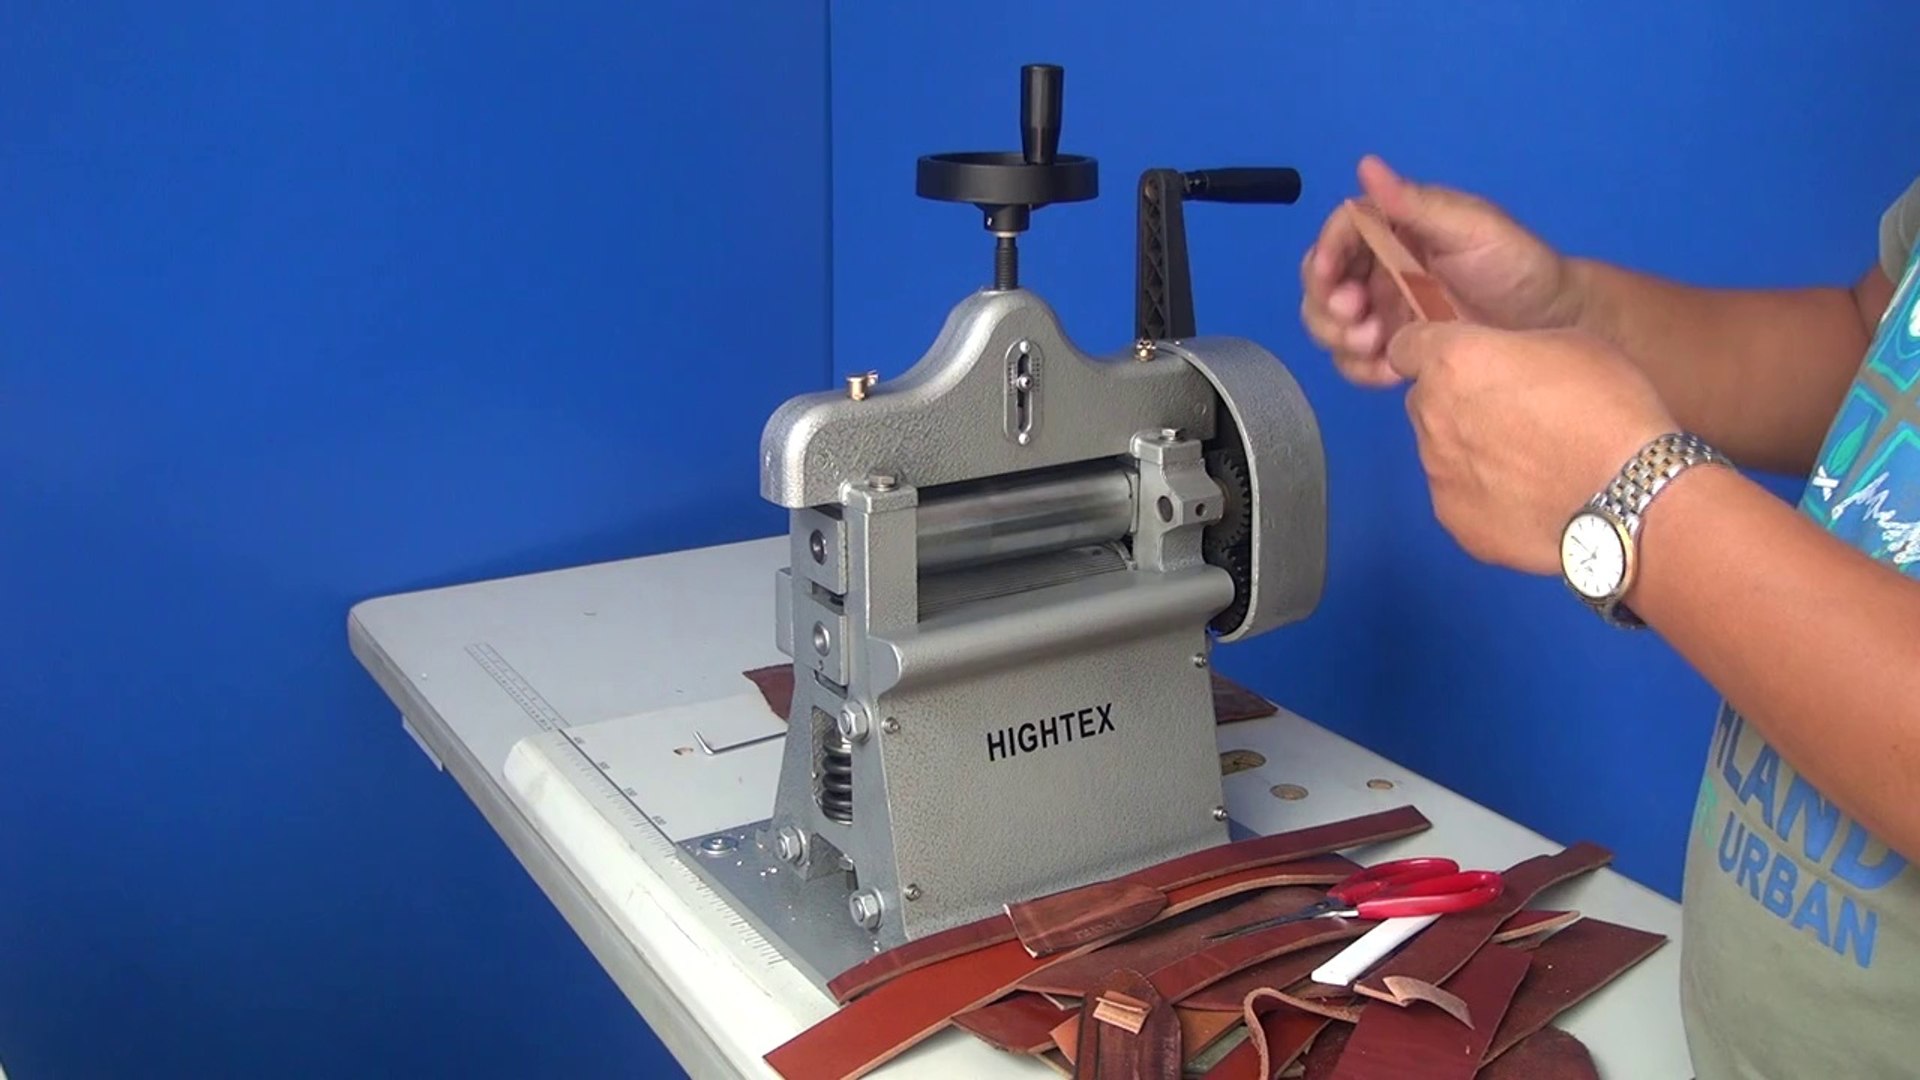 Hand Cranked Leather Splitter - video Dailymotion